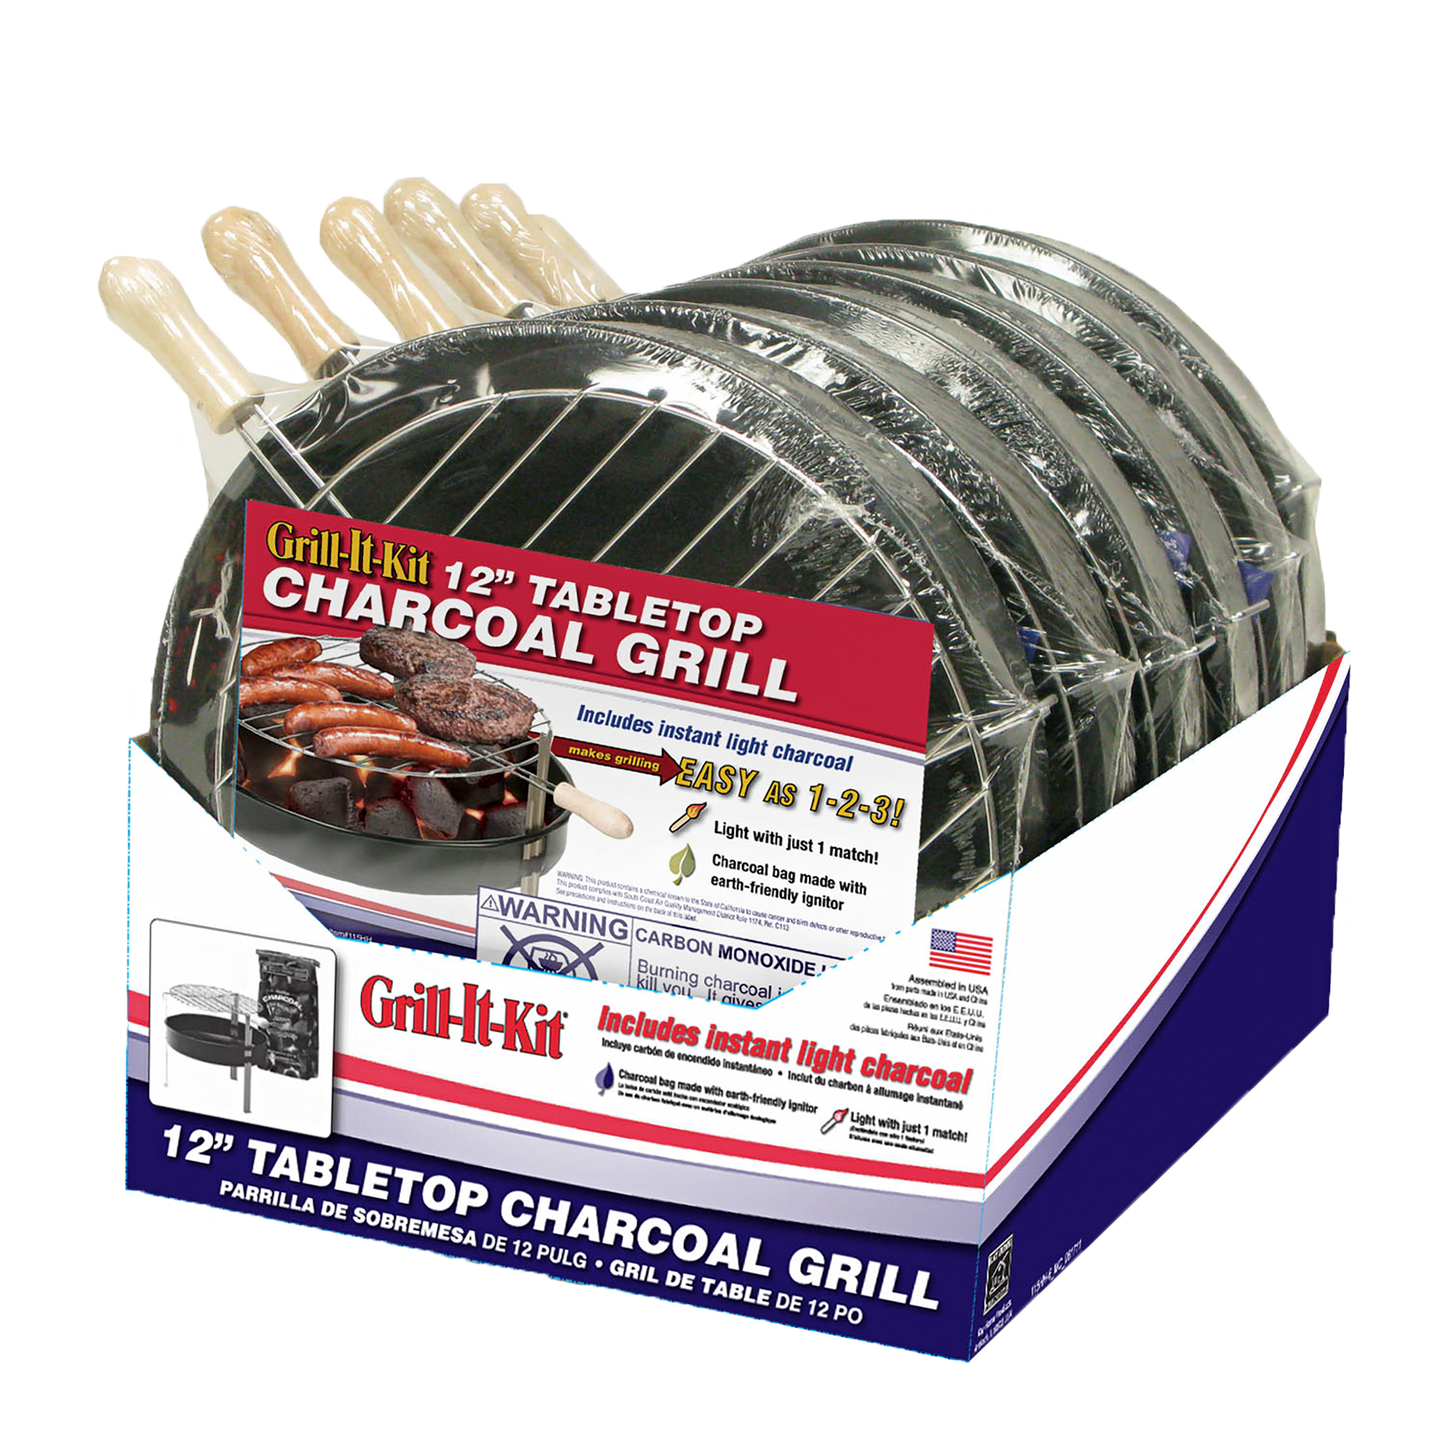 12" TABLE TOP GRILL KIT